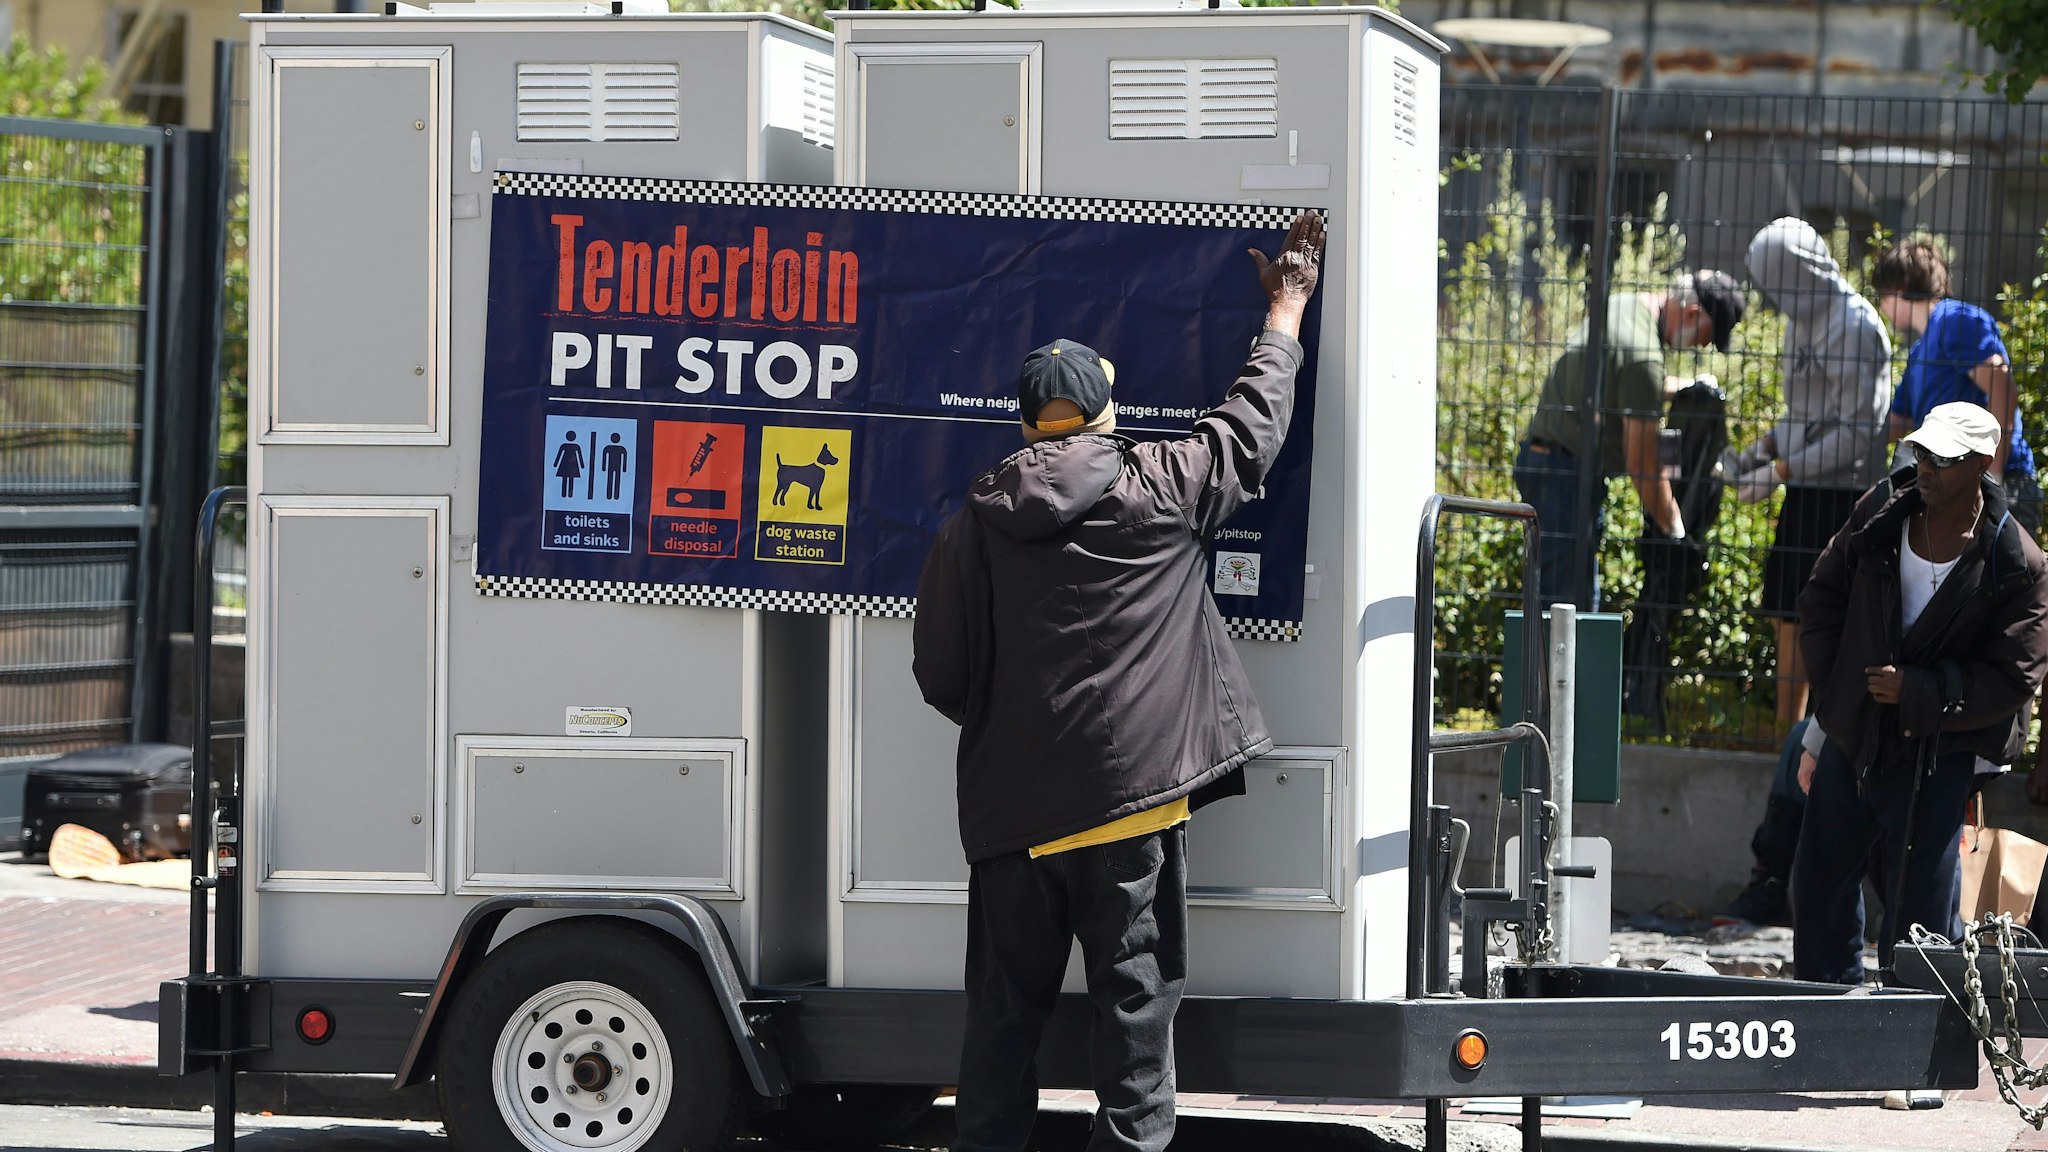 John Leggett helps to install portable toilets in the Tenderloin district of San Francisco, California on Tuesday, June, 28, 2016. The Tenderloin district is commonly known as a hotbed for homelessness where people often relieve themselves on the streets. (Photo by Josh Edelson / AFP) (Photo credit should read JOSH EDELSON/AFP via Getty Images)